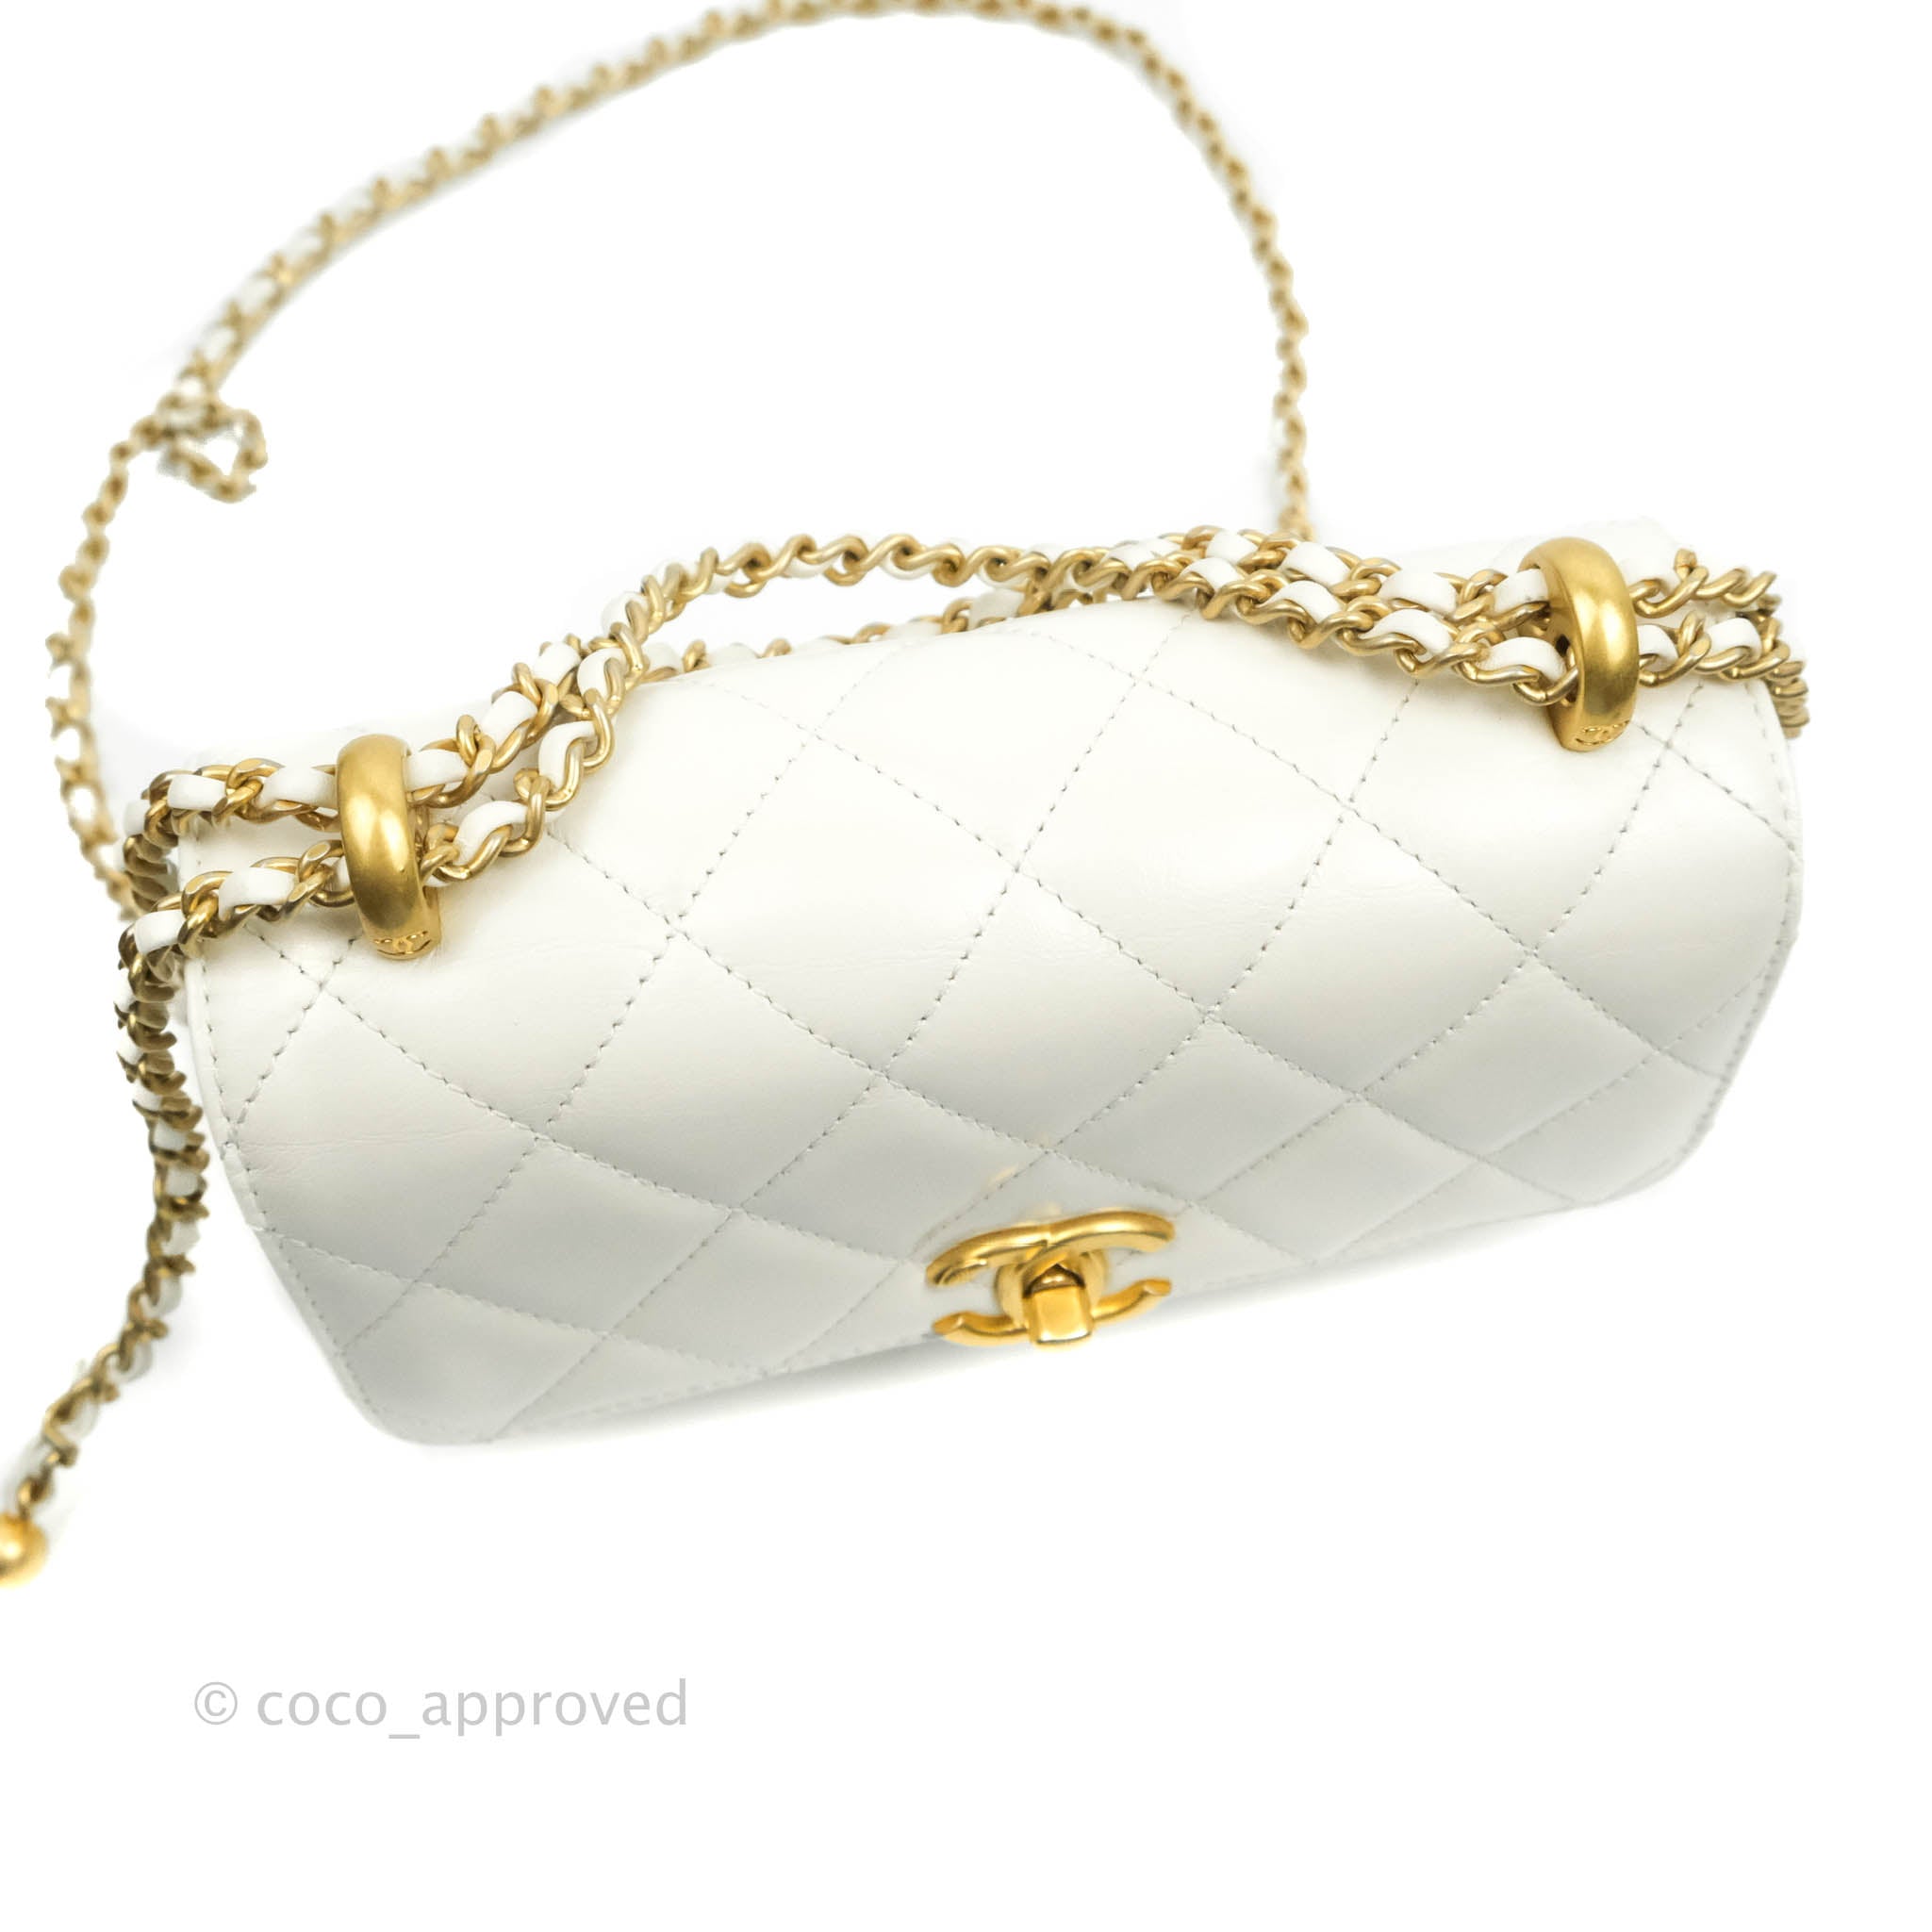 Chanel Light Yellow Quilted Calfskin Classic Mini Flap Bag White Gold Hardware, 2021 (Like New)